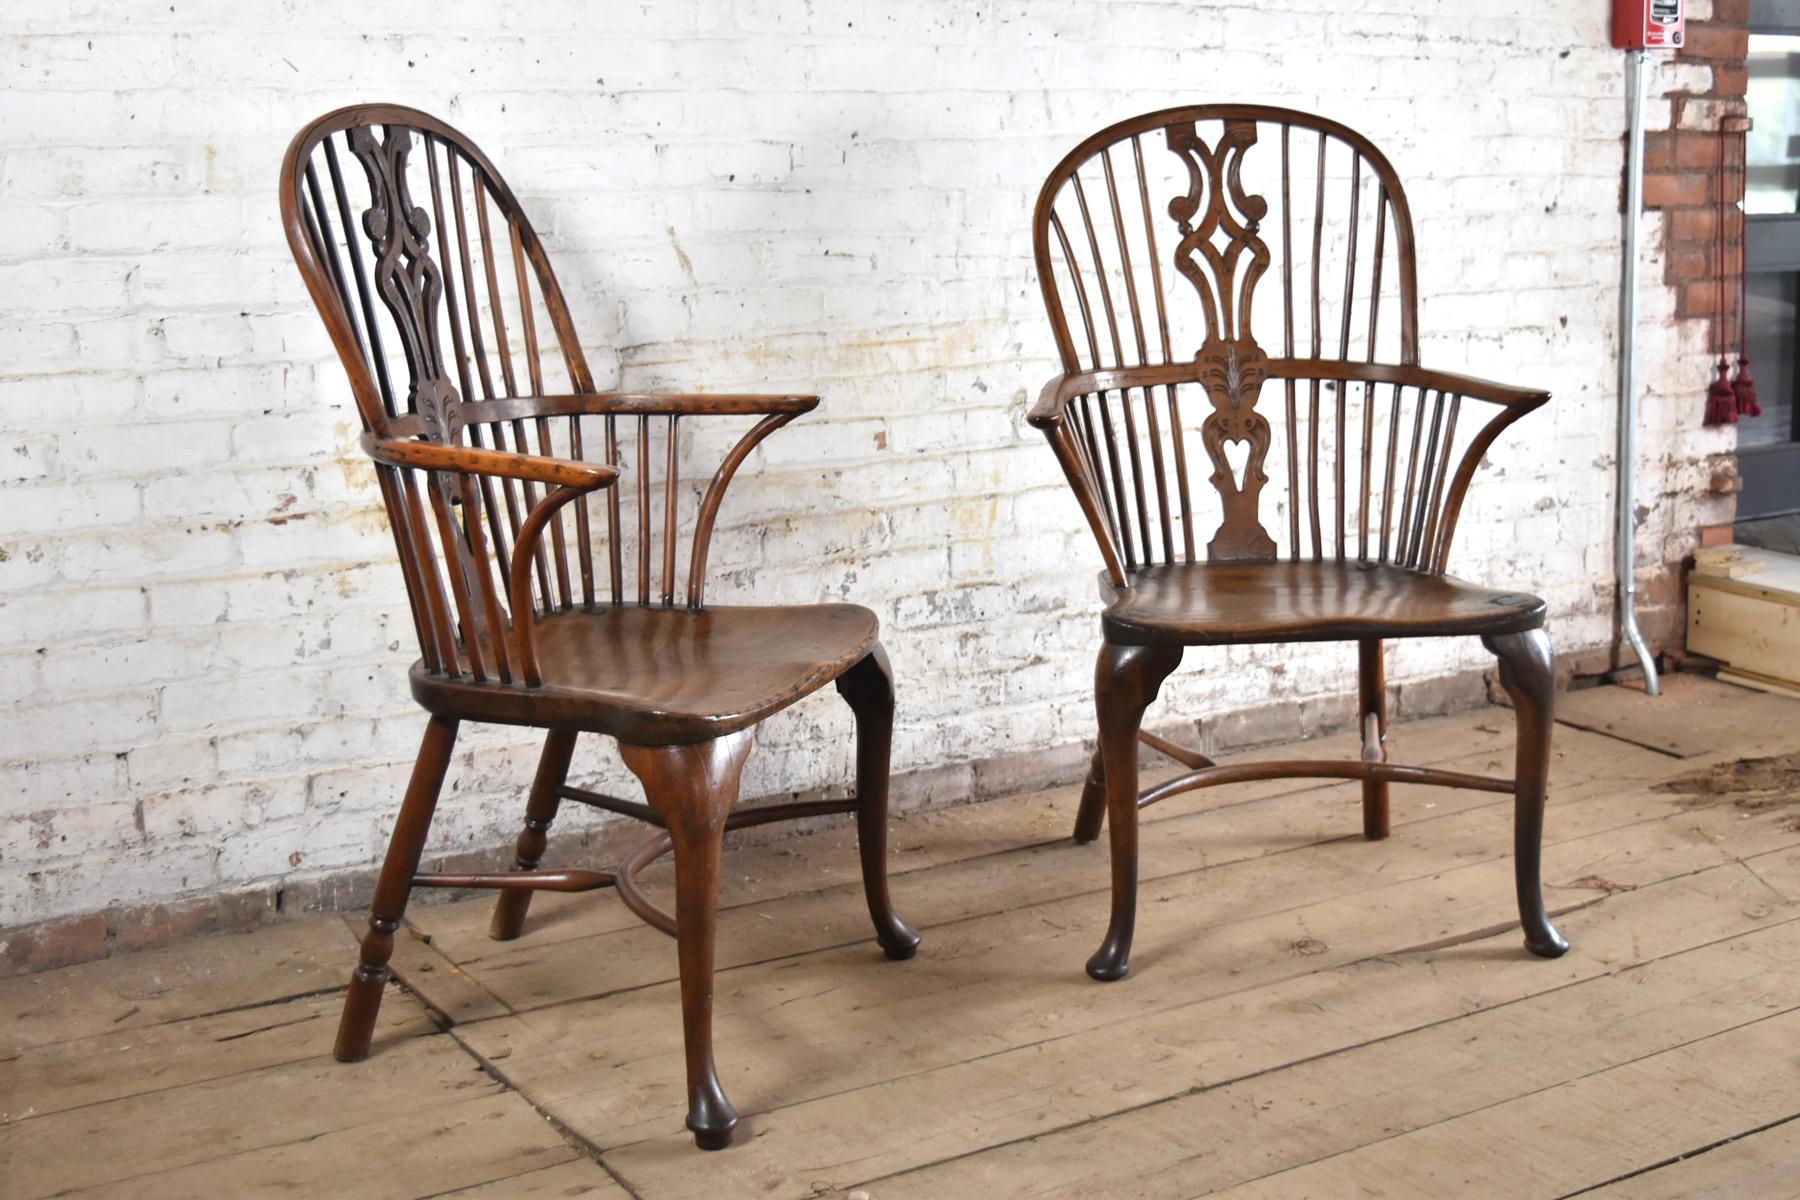 Rare pair of English 18th century Windsor armchairs from the Thames Valley Region, George III Period, with bow-backs having pierced and carved middle splats, cabriole front legs and turned back legs connected with turned stretchers, with a rich warm